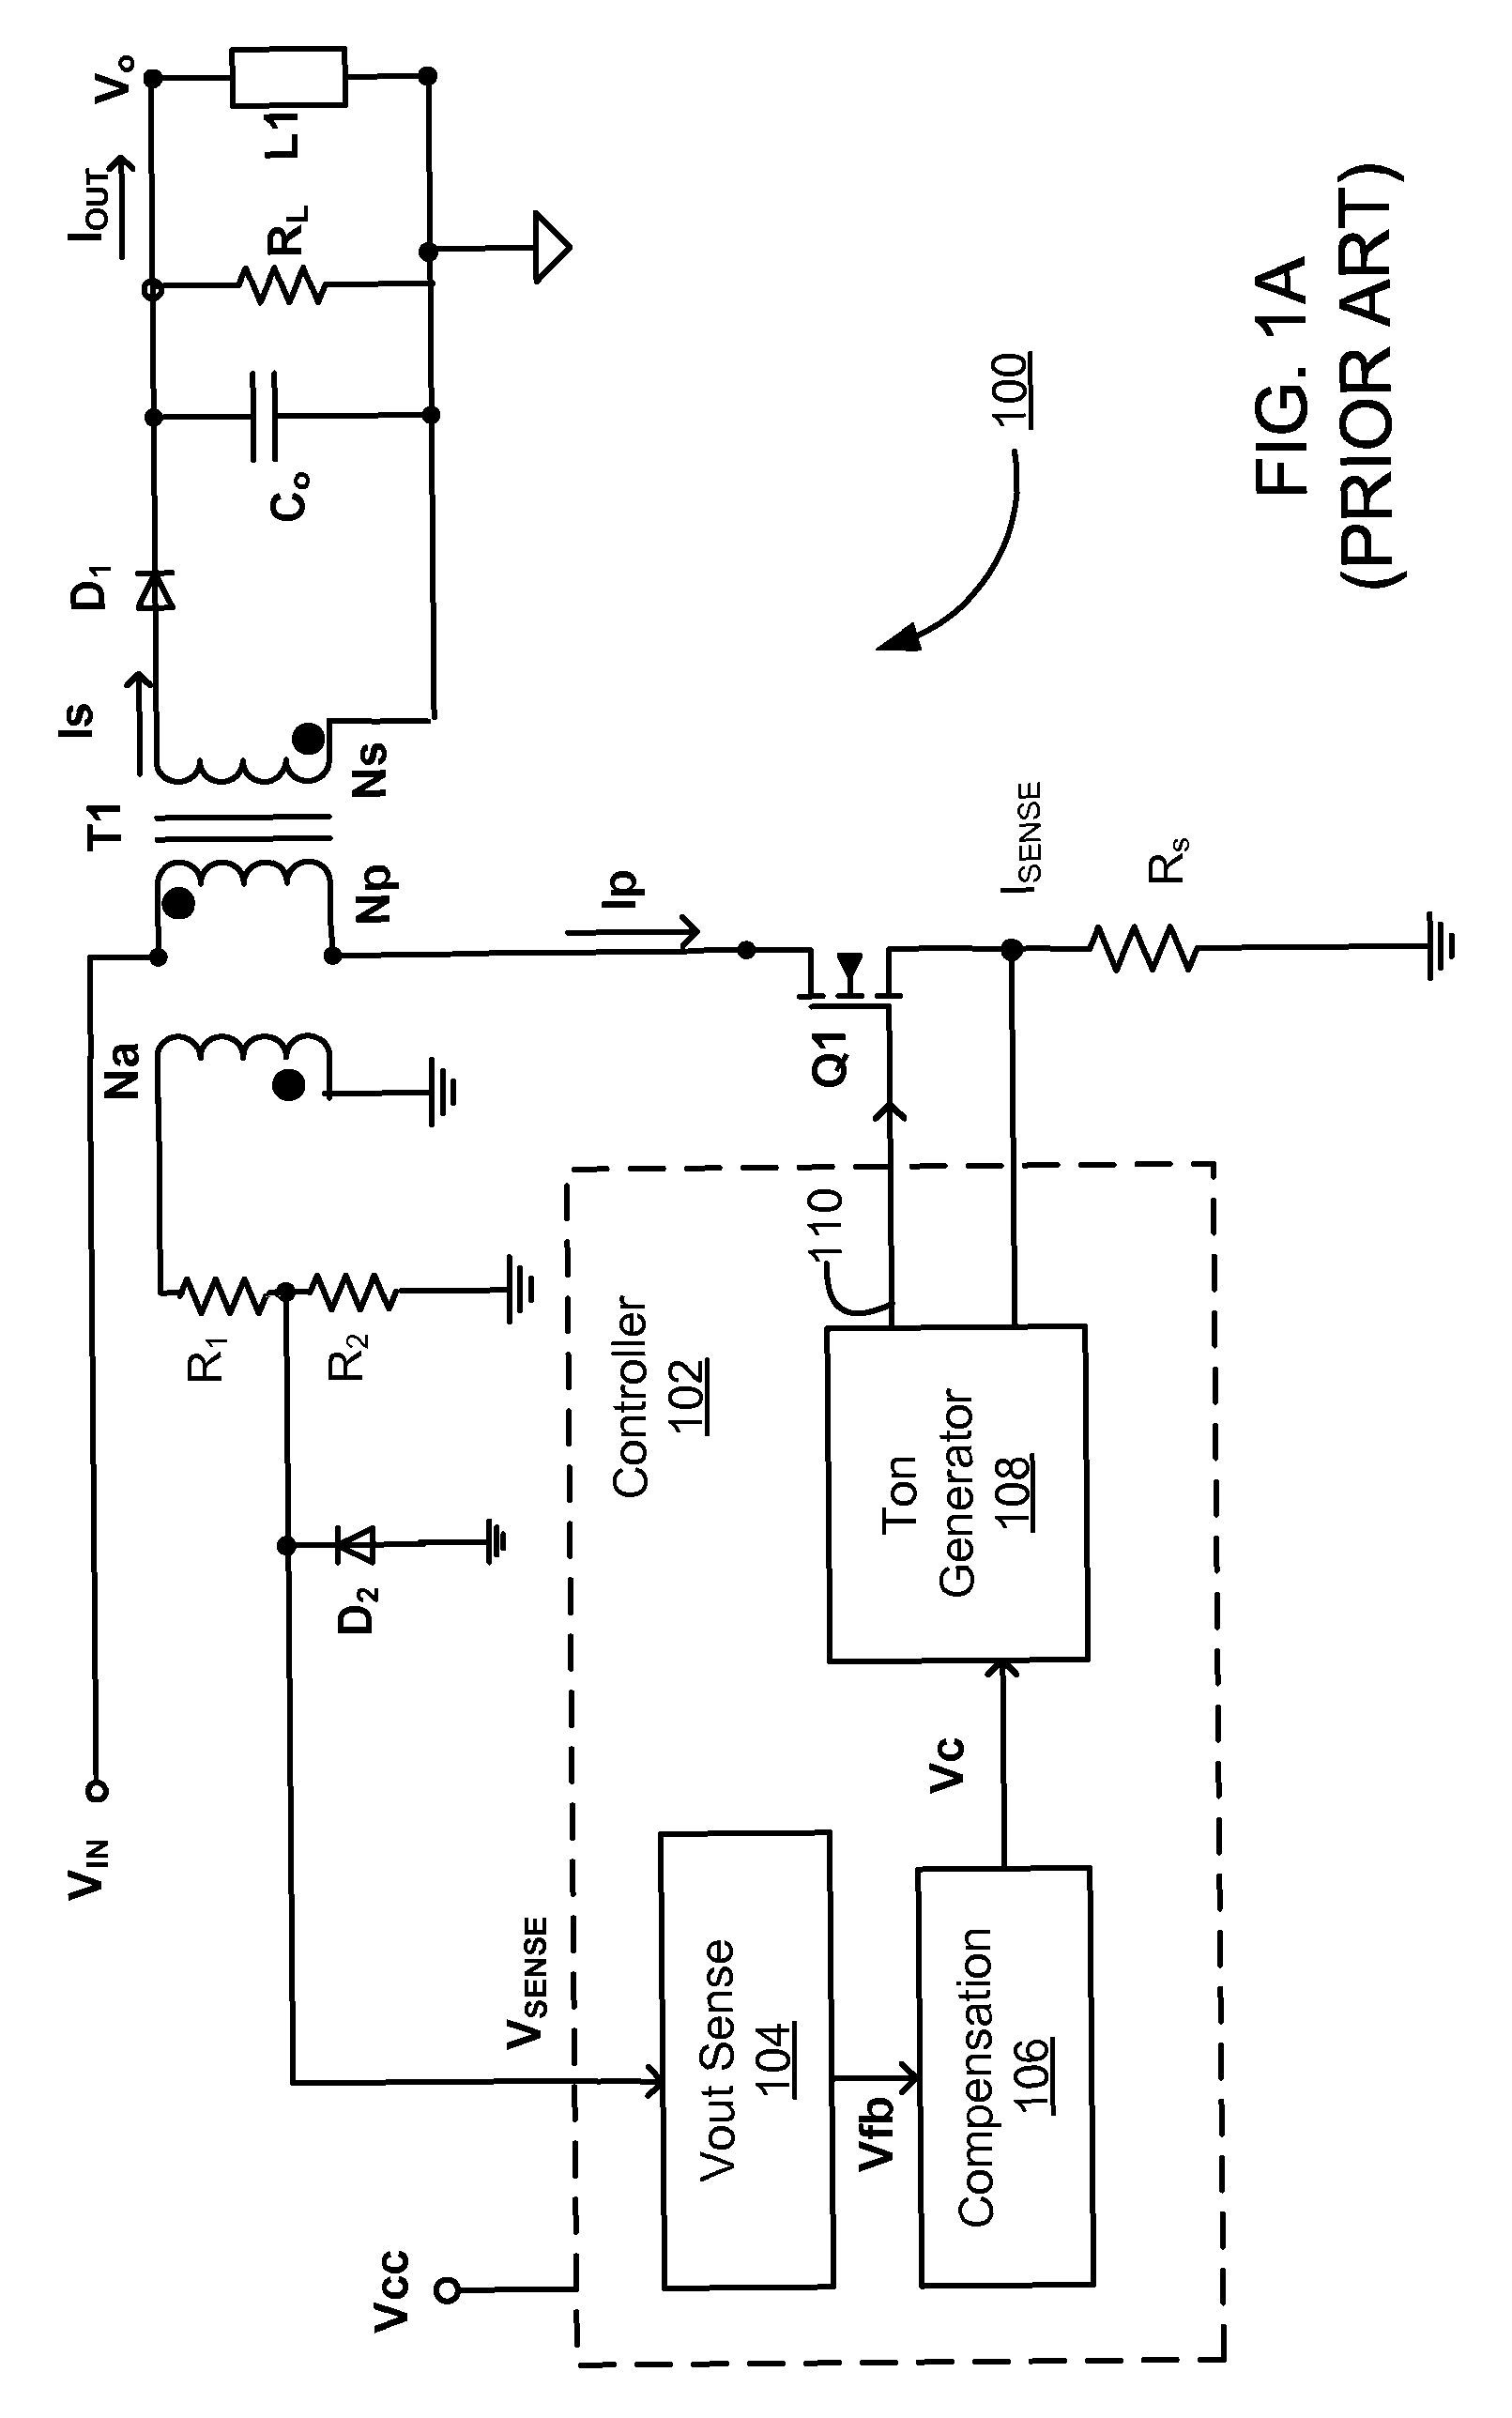 Detecting light load conditions and improving light load efficiency in a switching power converter